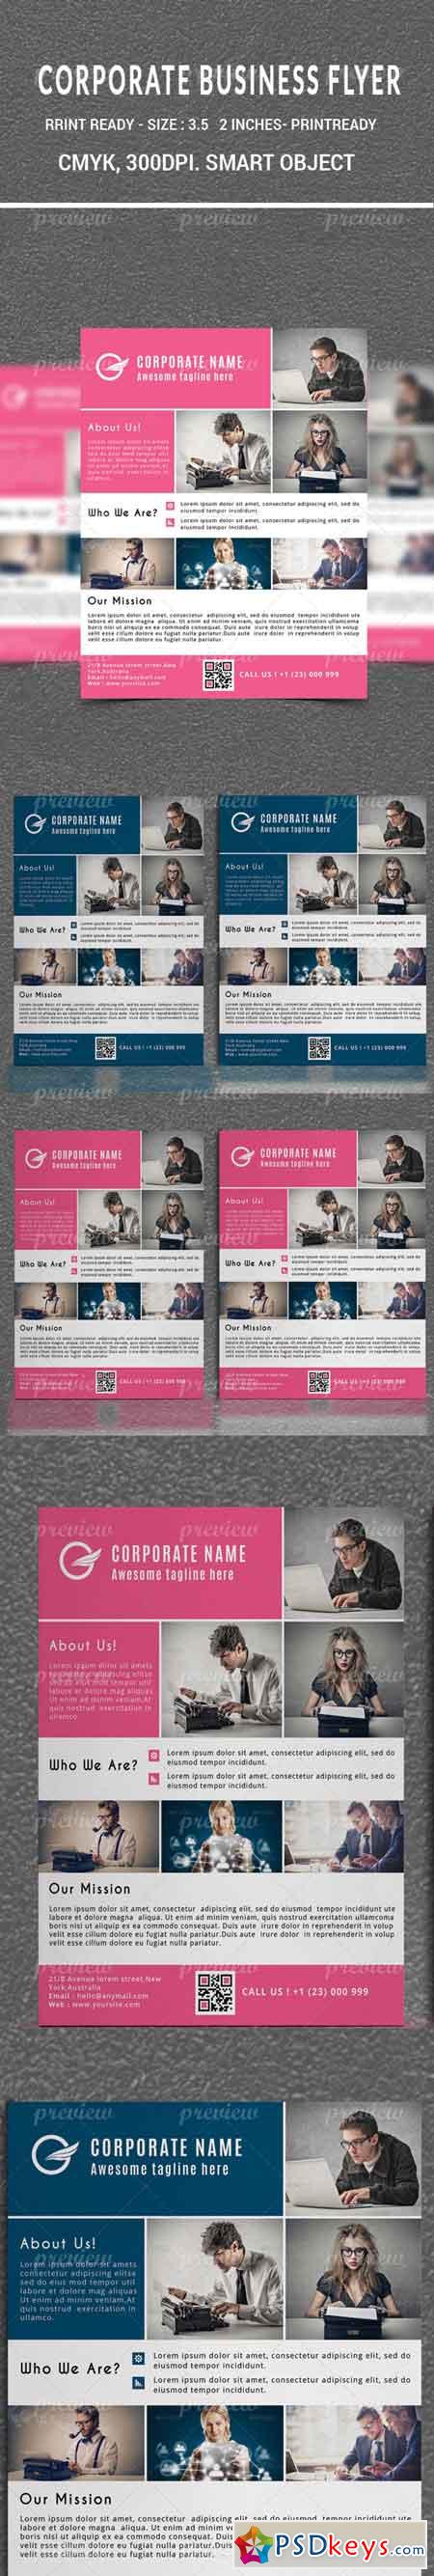 Corporate Business Flyer 4749